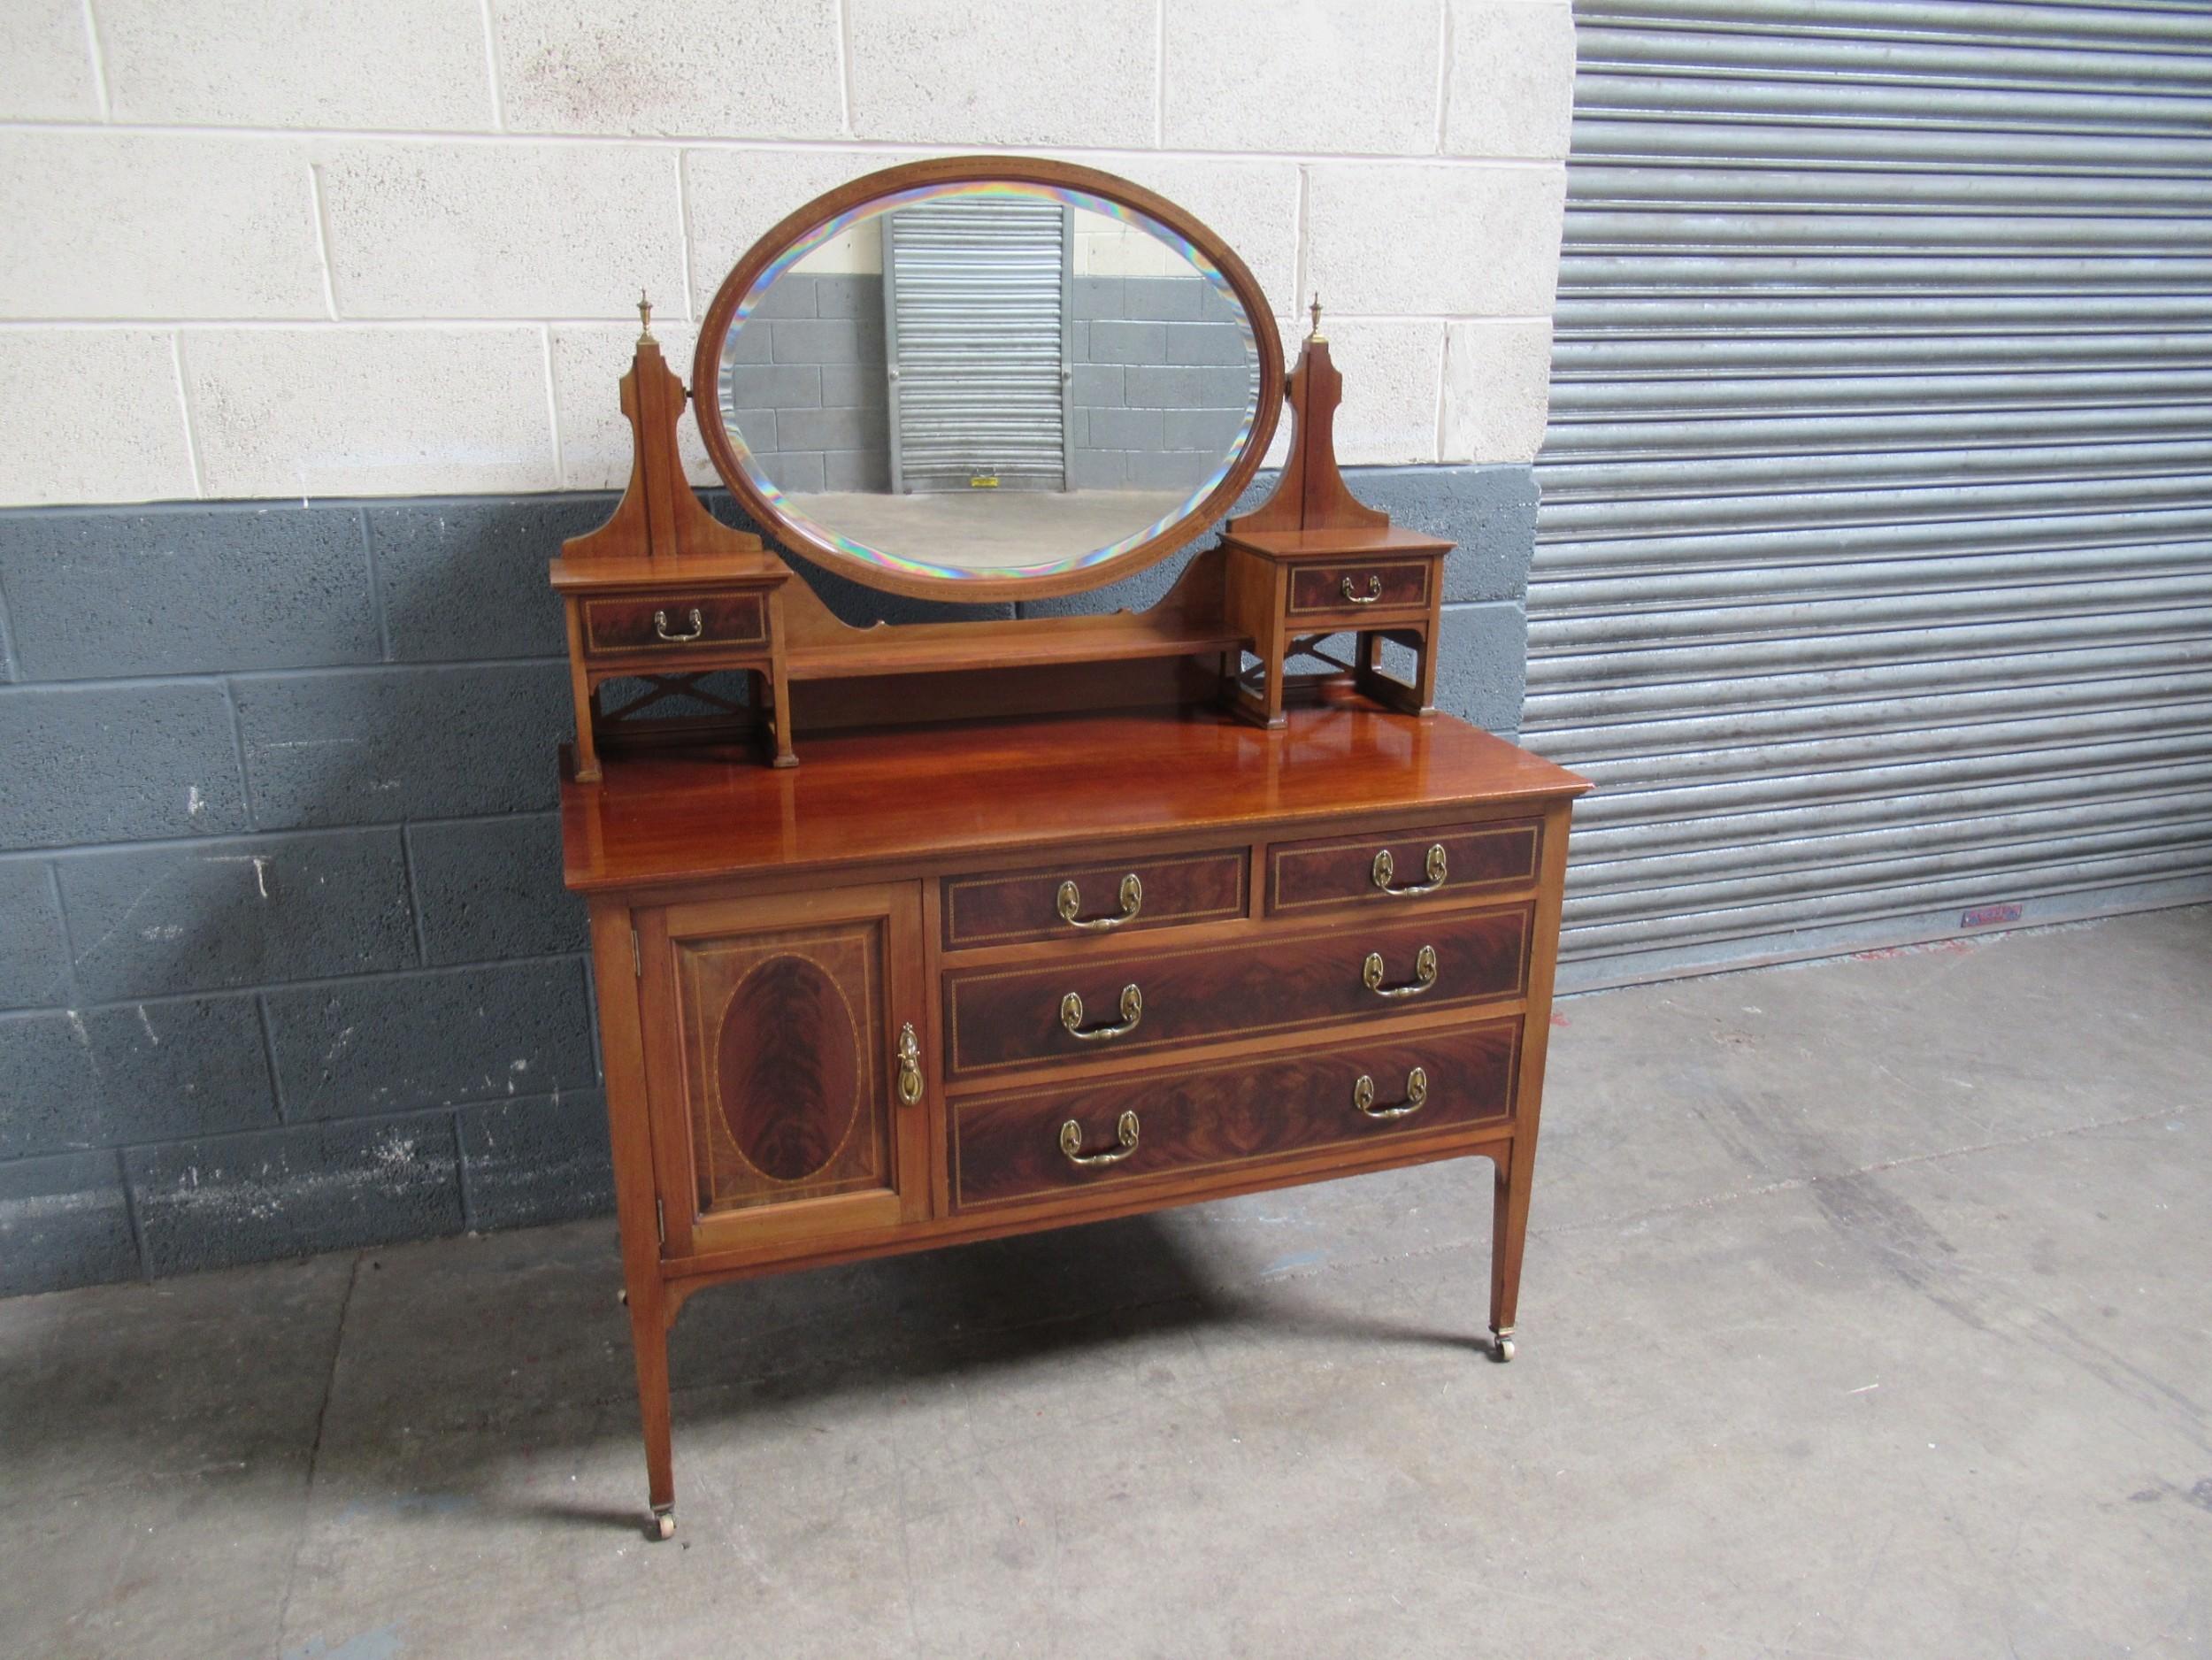 Edwardian Lovely Antique English 19th C. inlaid flame mahogany Dressing Table or Vanity For Sale